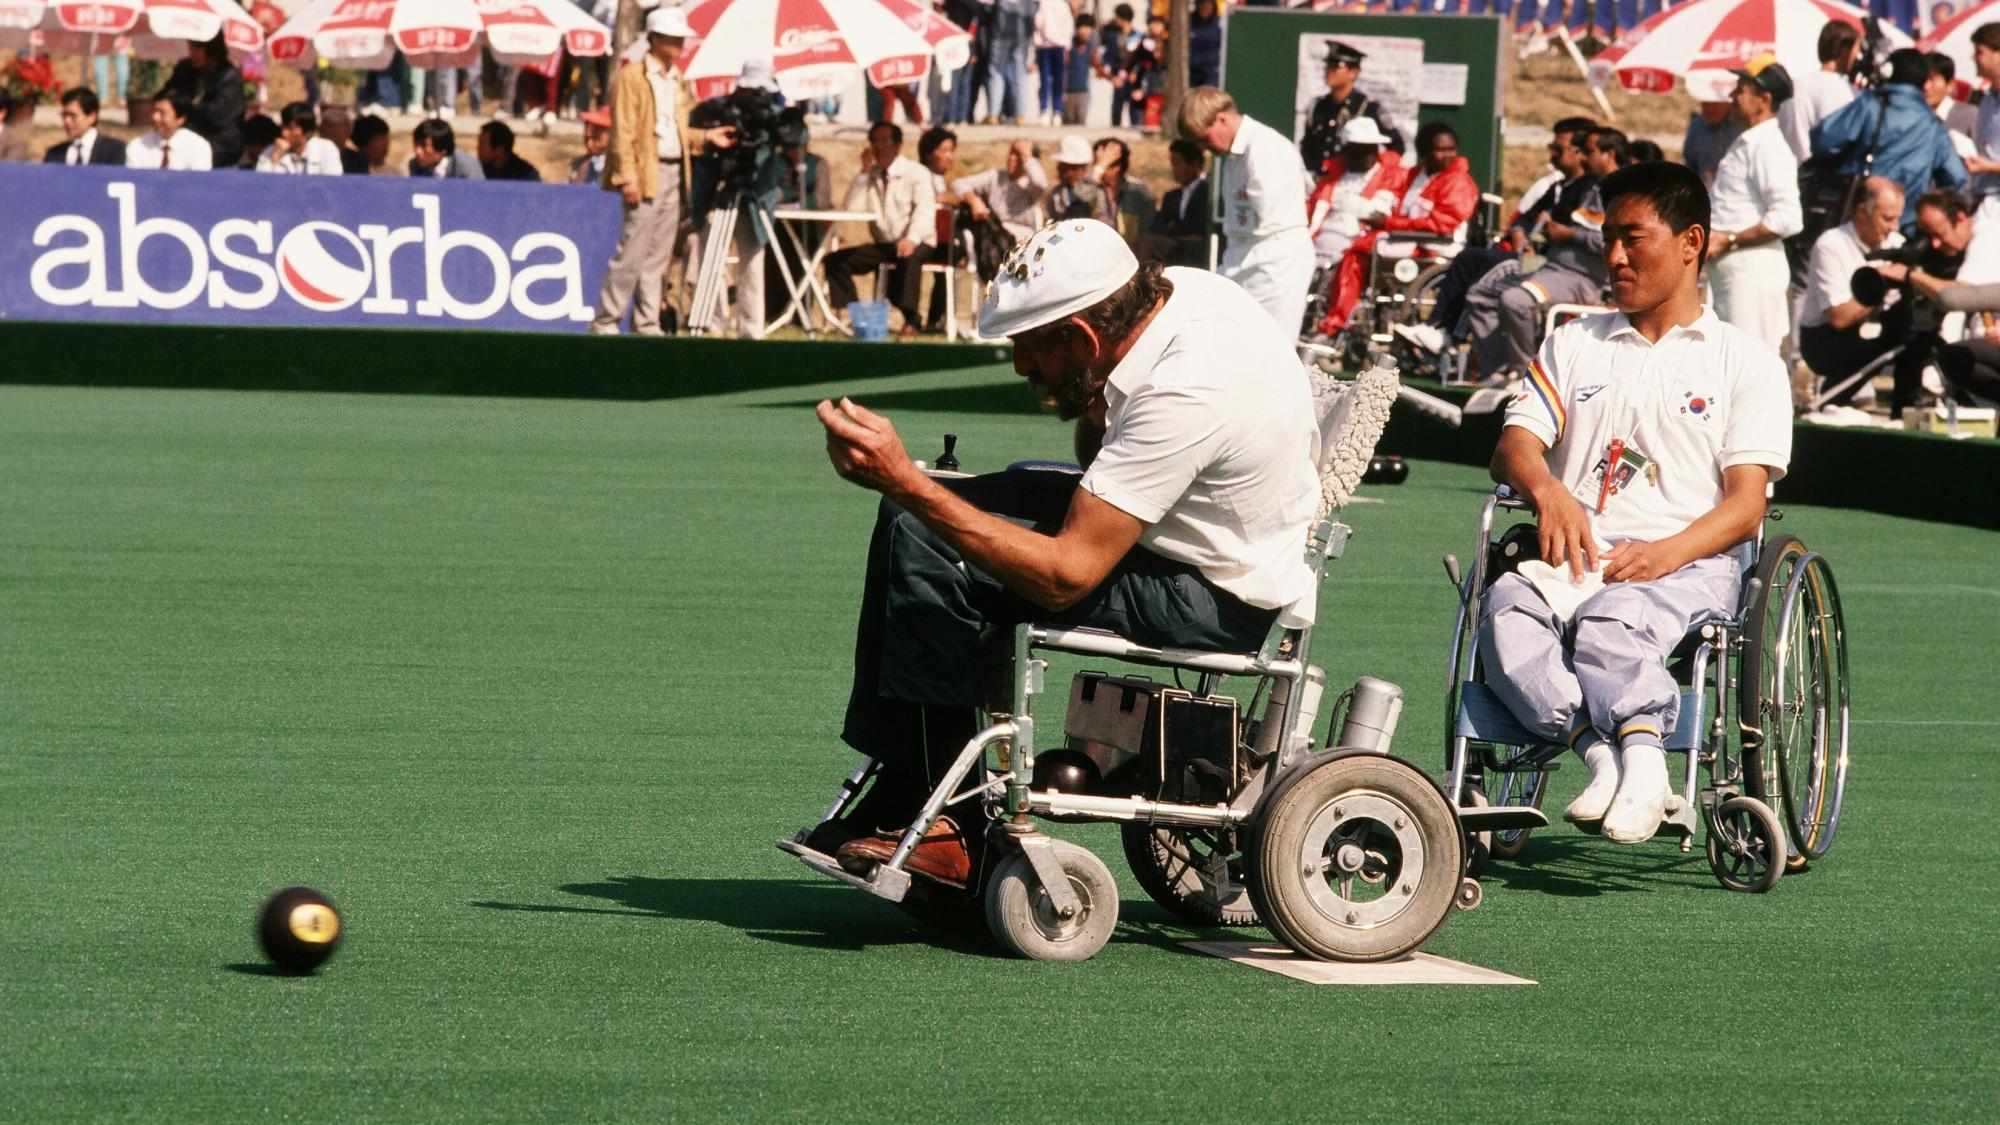 Boccia player on a wheelchair throws the jack while another one observes